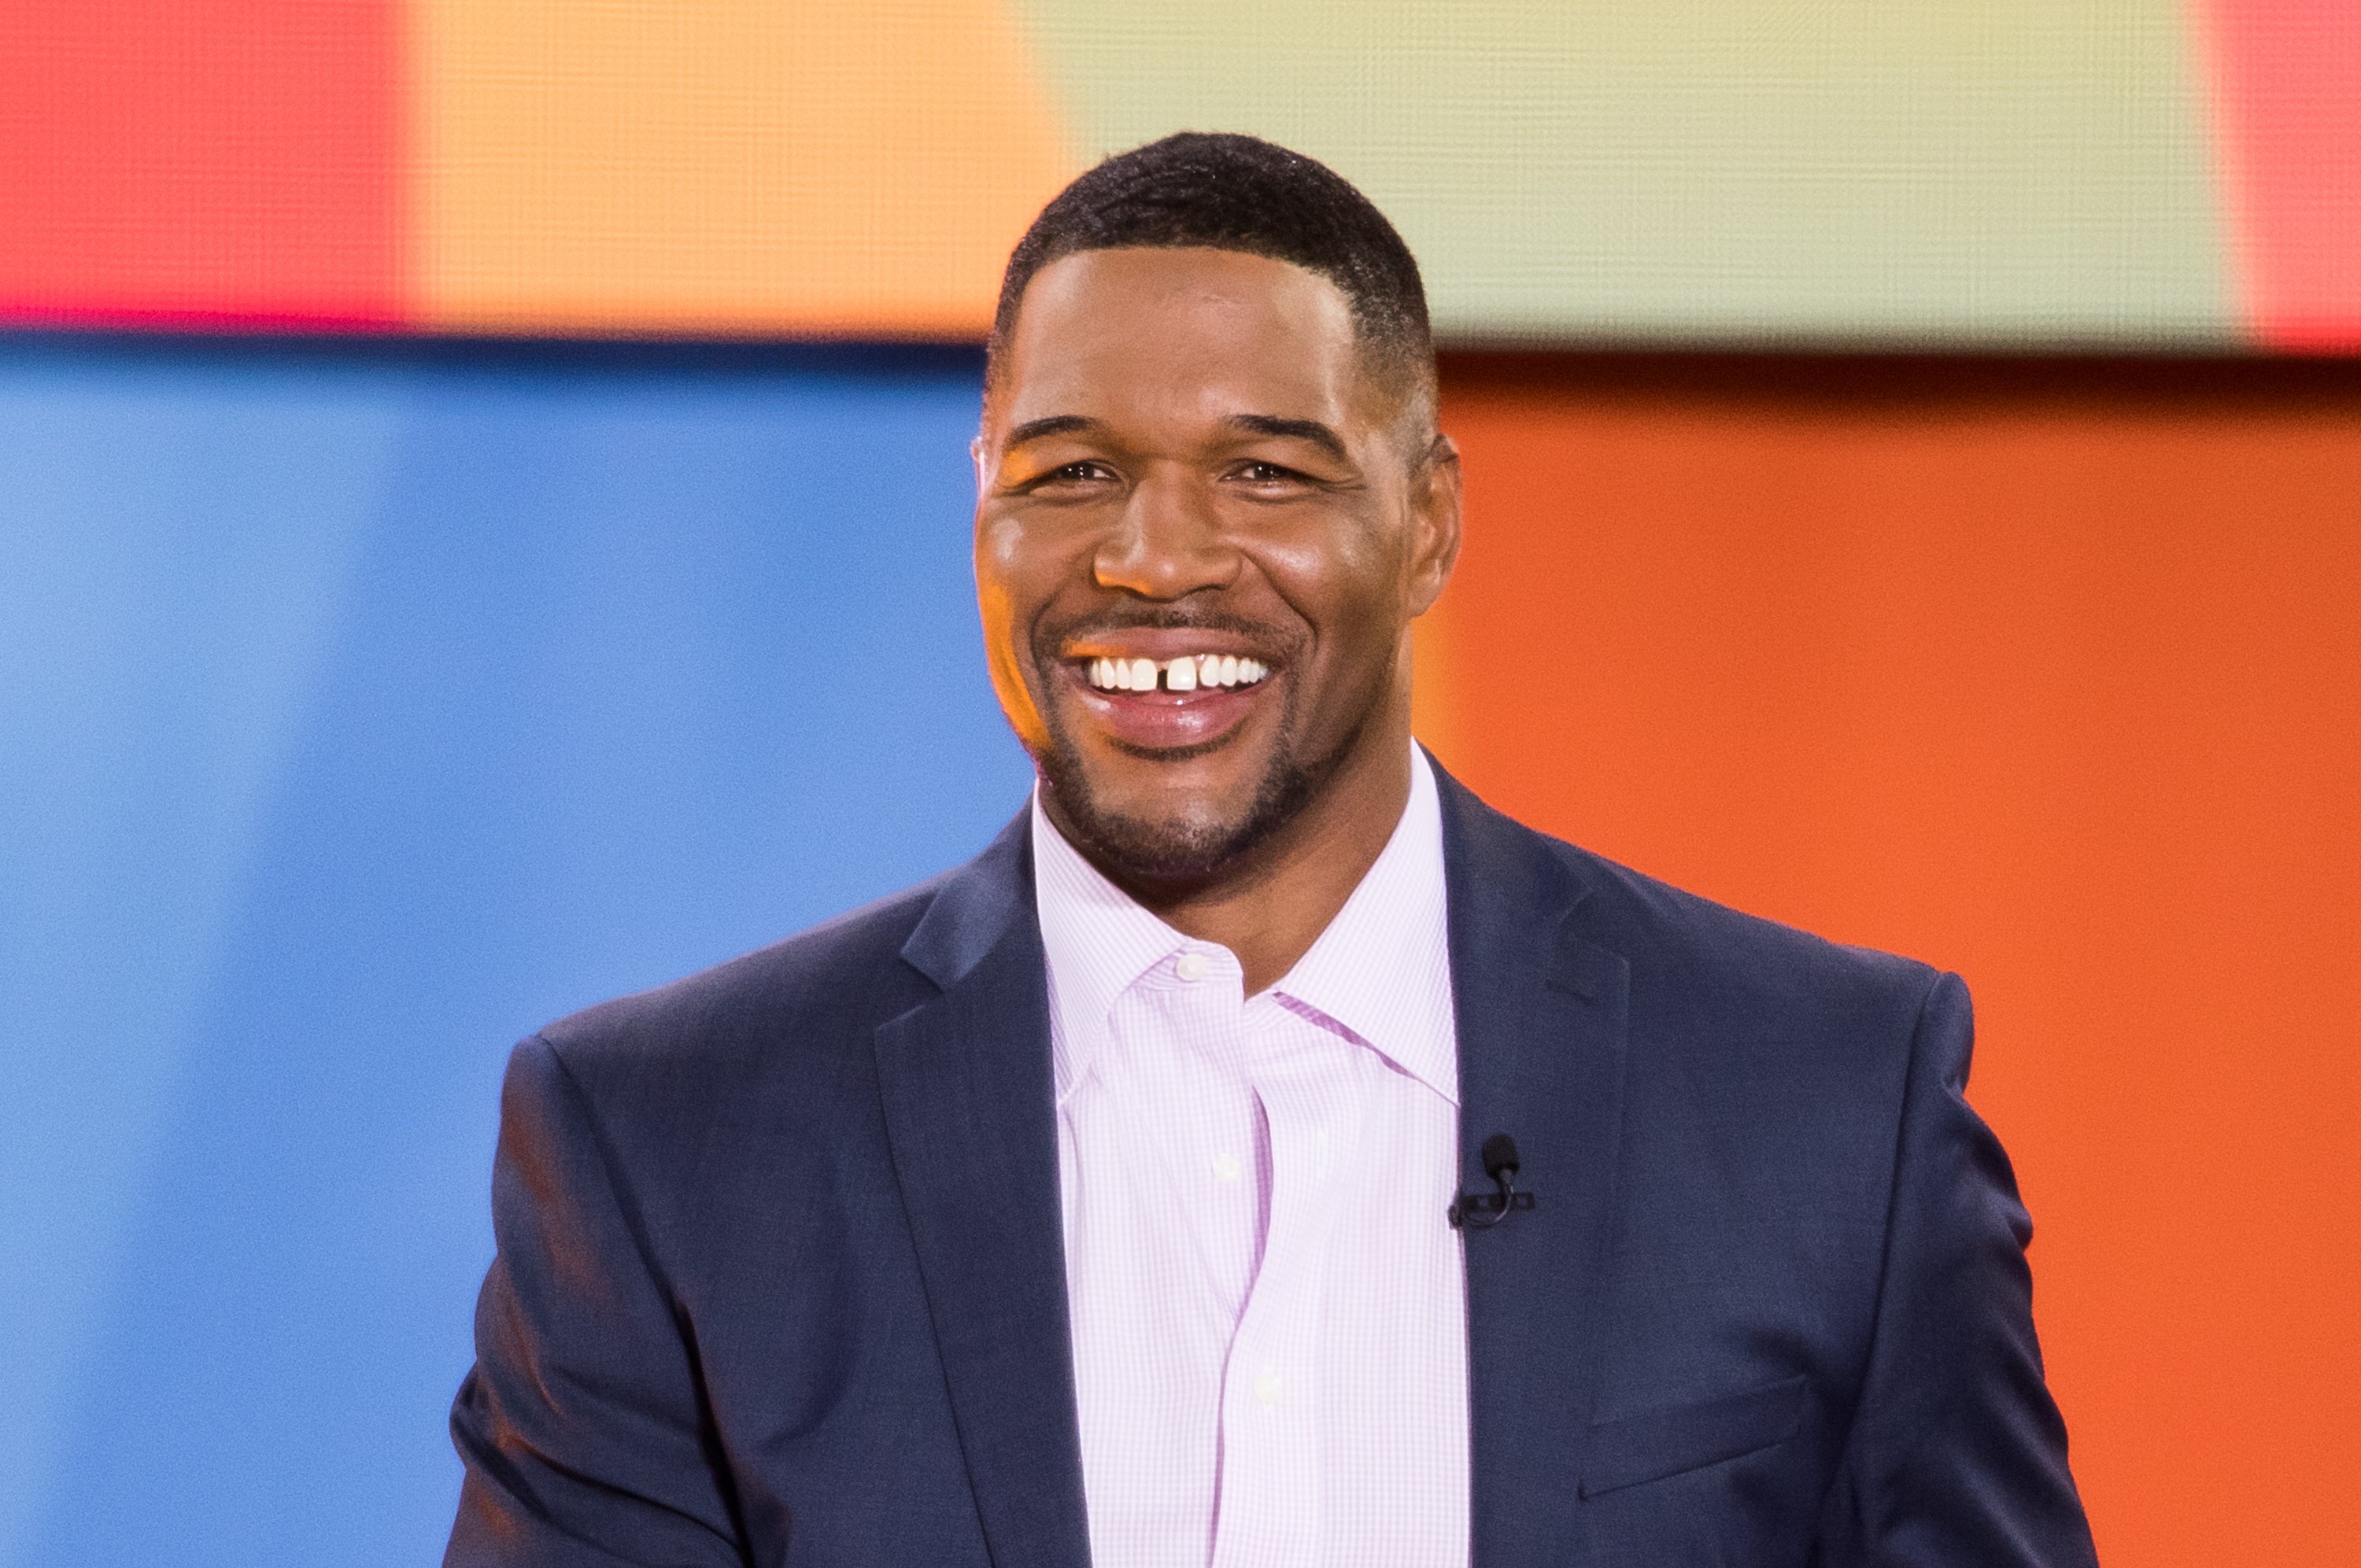 Michael Strahan at ABC's "Good Morning America" at Rumsey Playfield, Central Park on July 6, 2018 in New York City  | Photo: Getty Images